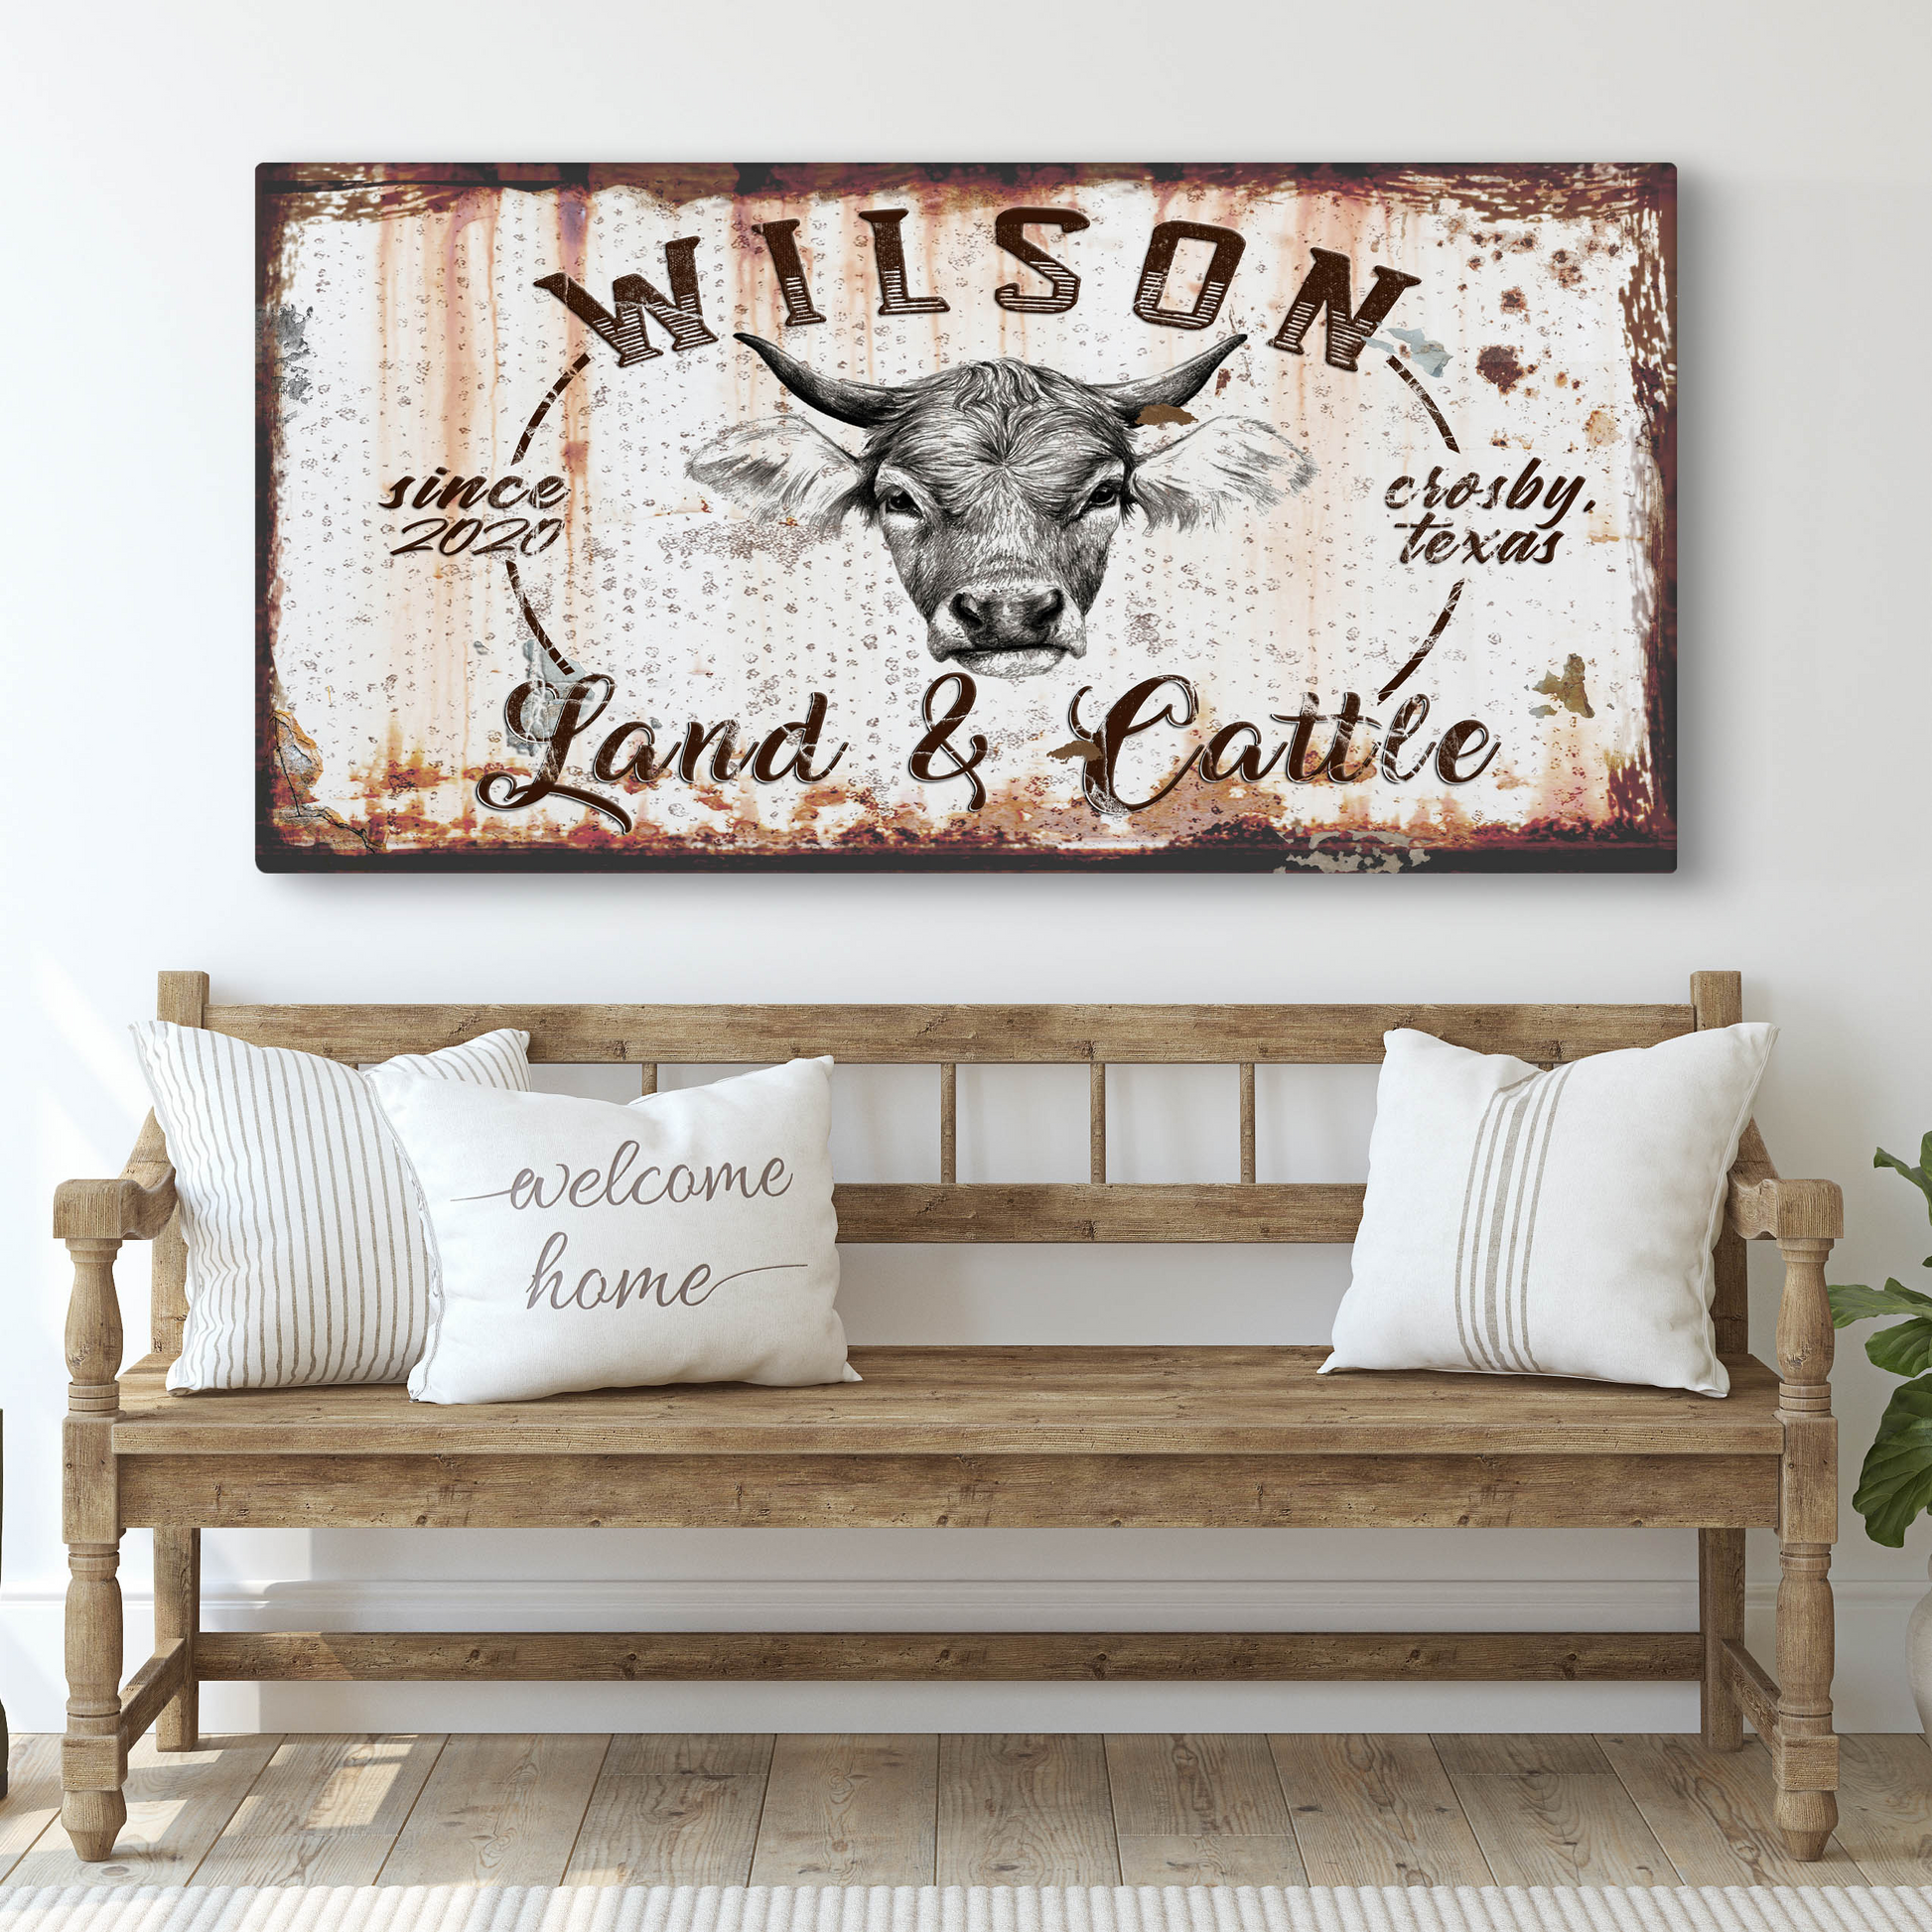 Land and Cattle Decor Sign - Image by Tailored Canvases